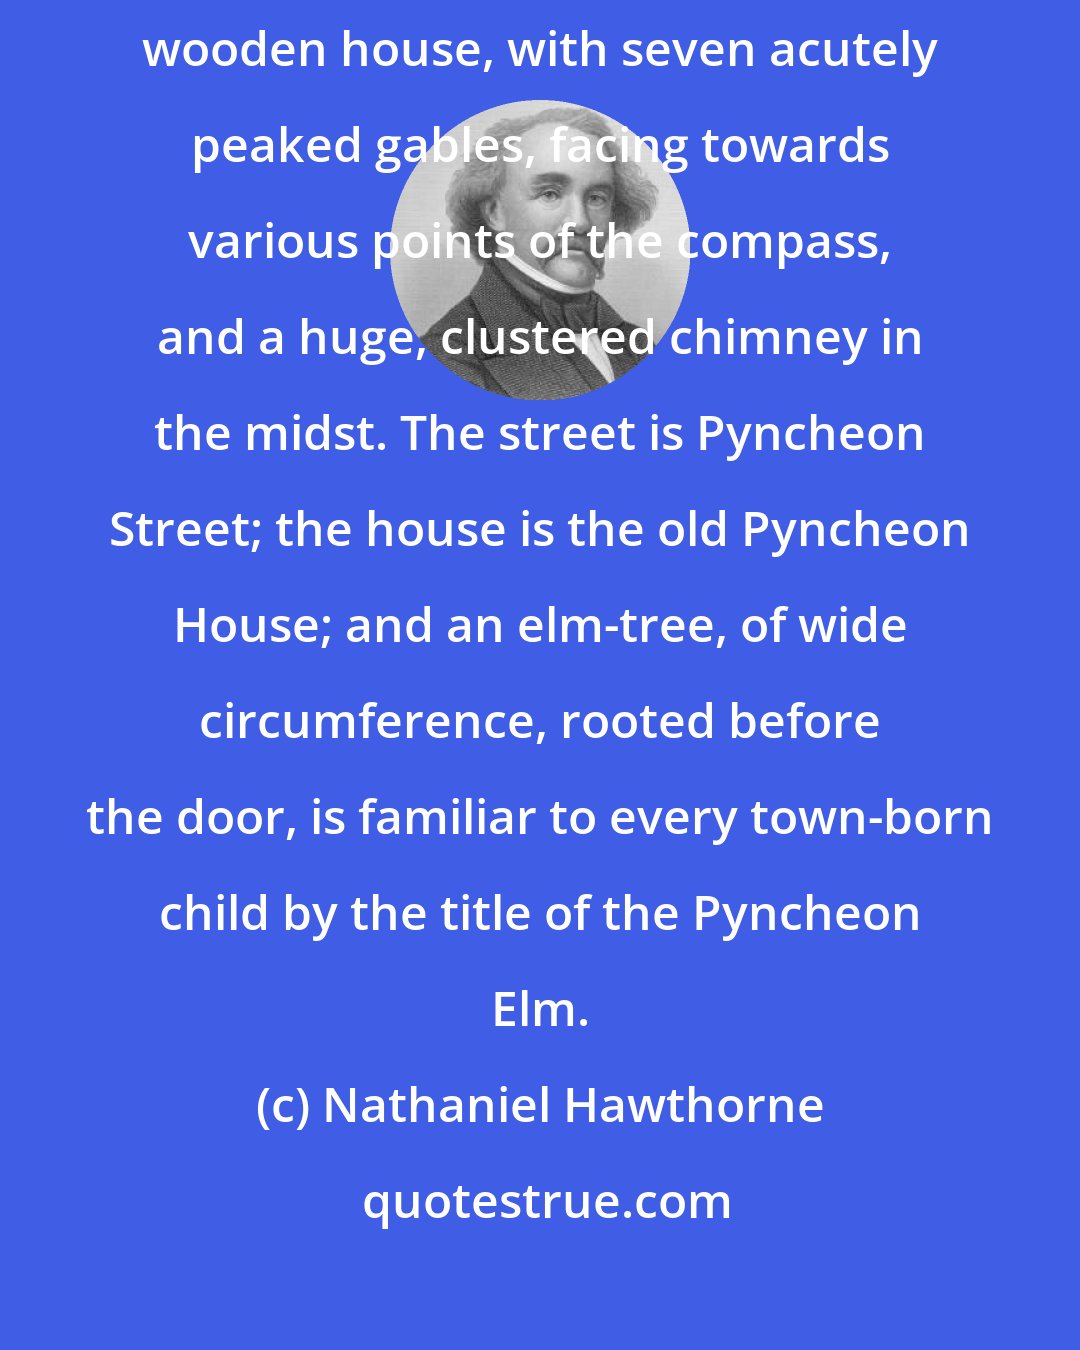 Nathaniel Hawthorne: Halfway down a by-street of one of our New England towns stands a rusty wooden house, with seven acutely peaked gables, facing towards various points of the compass, and a huge, clustered chimney in the midst. The street is Pyncheon Street; the house is the old Pyncheon House; and an elm-tree, of wide circumference, rooted before the door, is familiar to every town-born child by the title of the Pyncheon Elm.